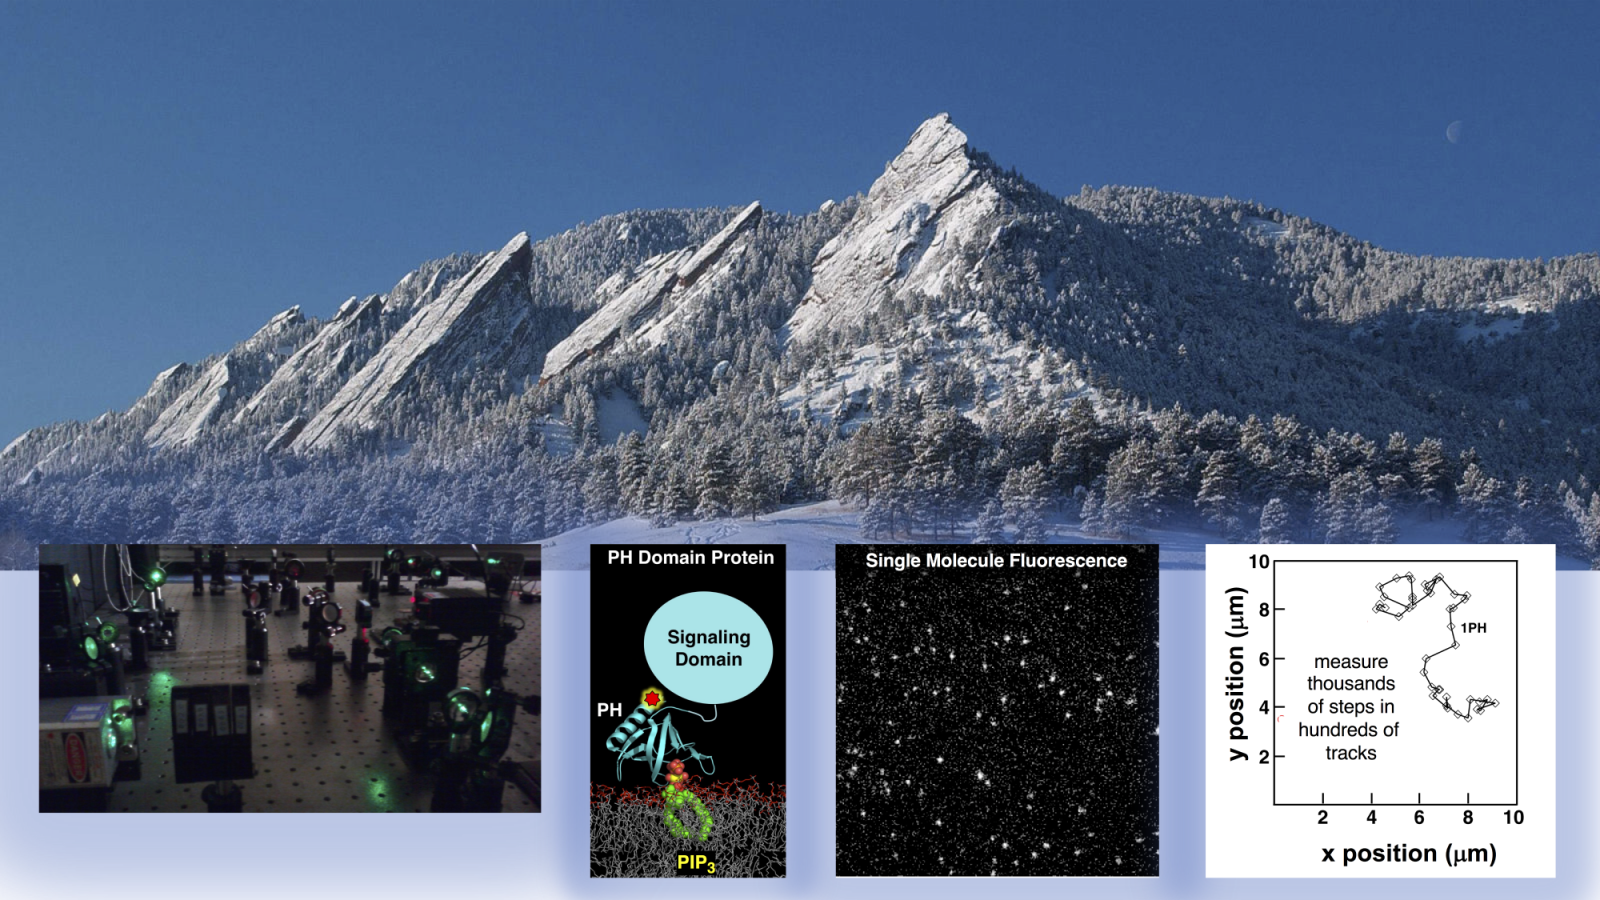 A mountain scene, with images of a single molecule instrument, a protein, a field of single proteins, and a diffusion track